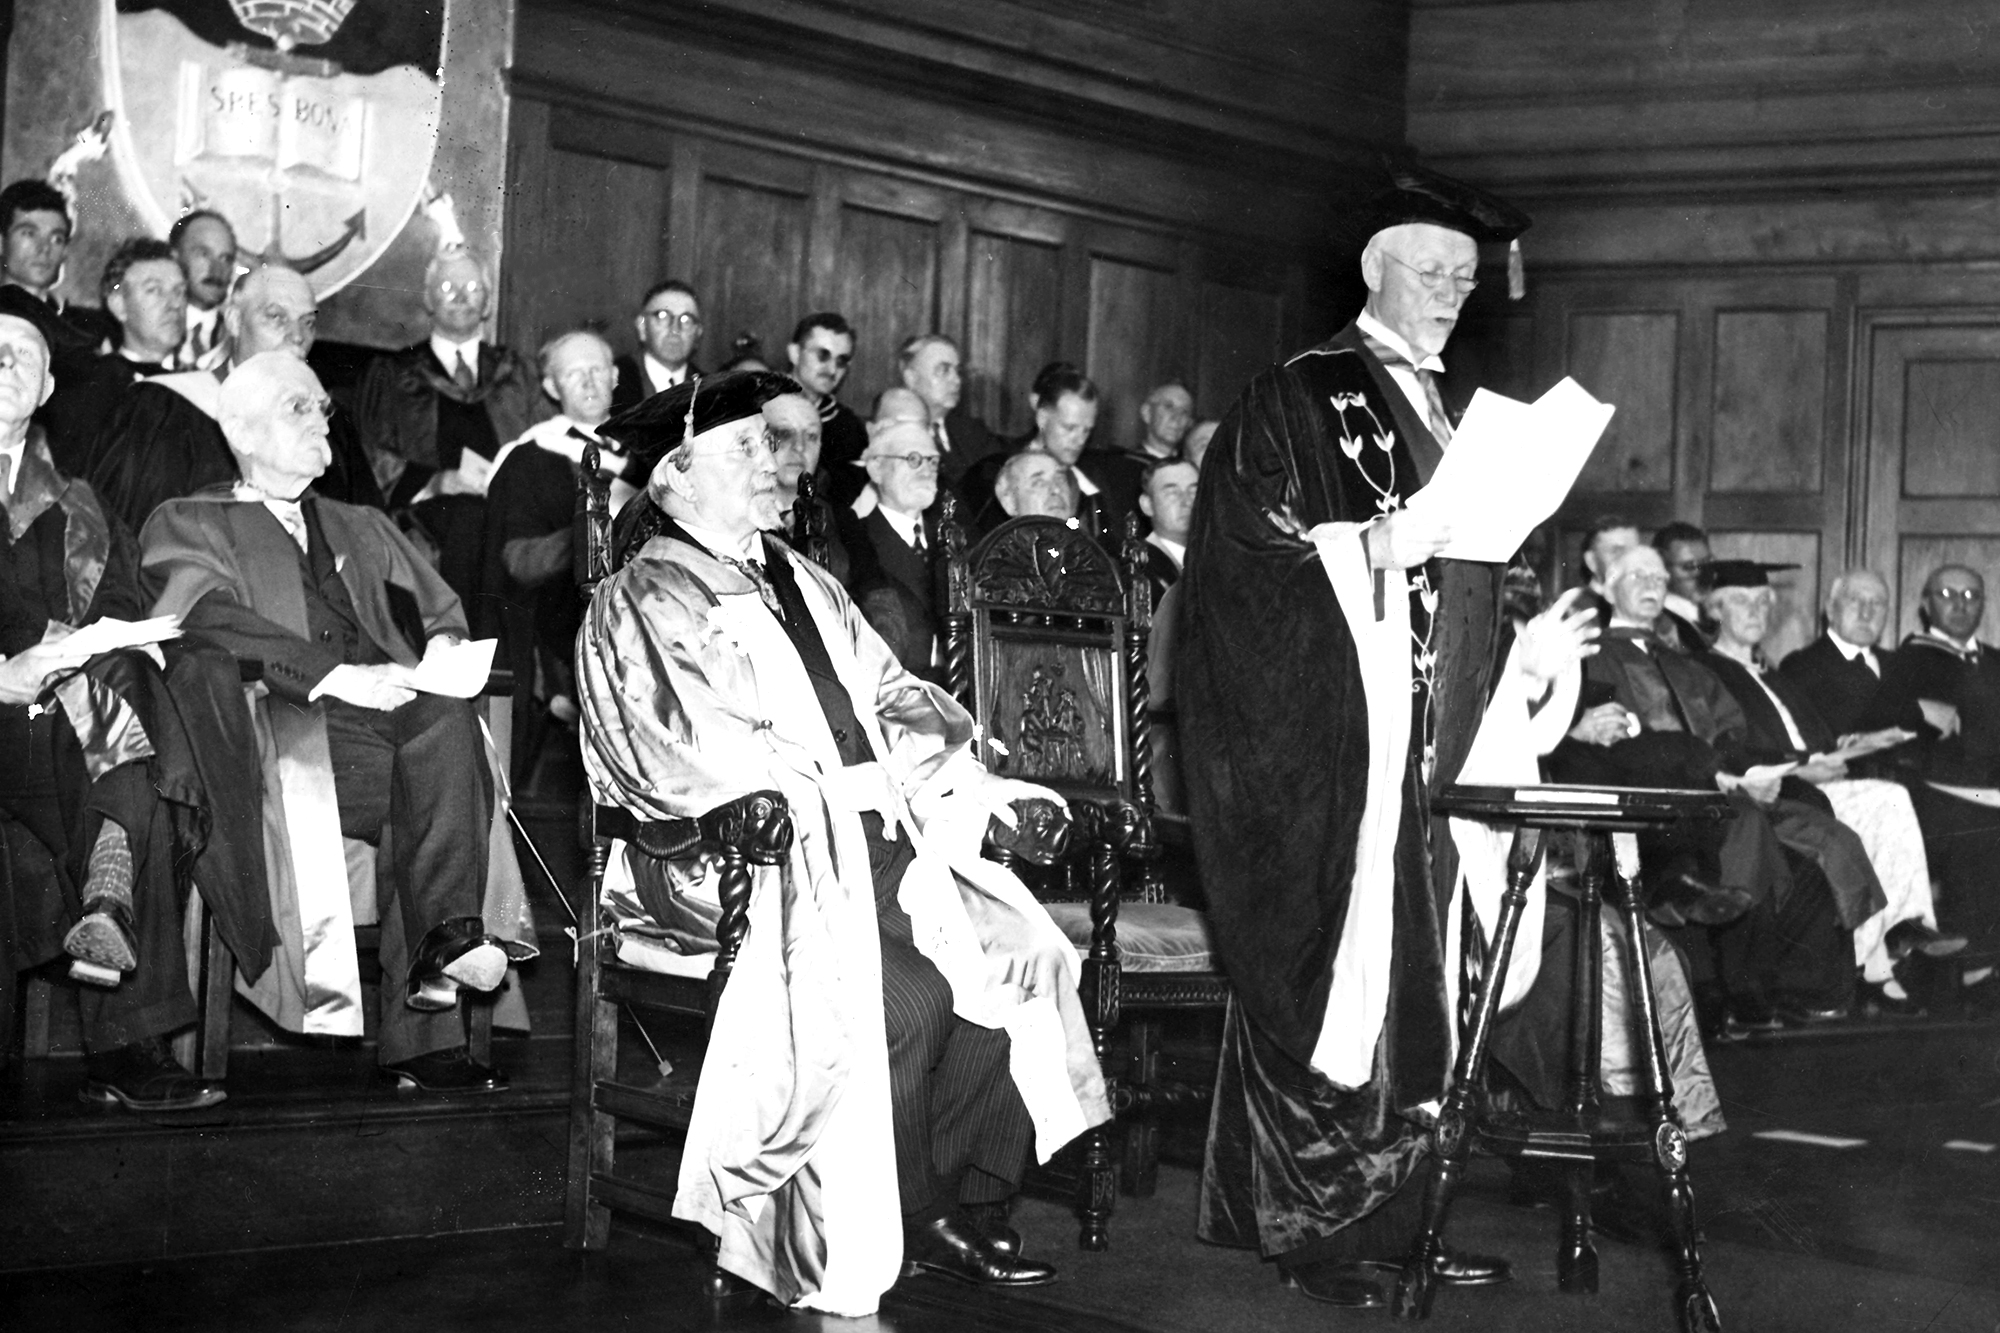 The second Chancellor of the University of Cape Town | 1936–1950: Field Marshal Jan Smuts